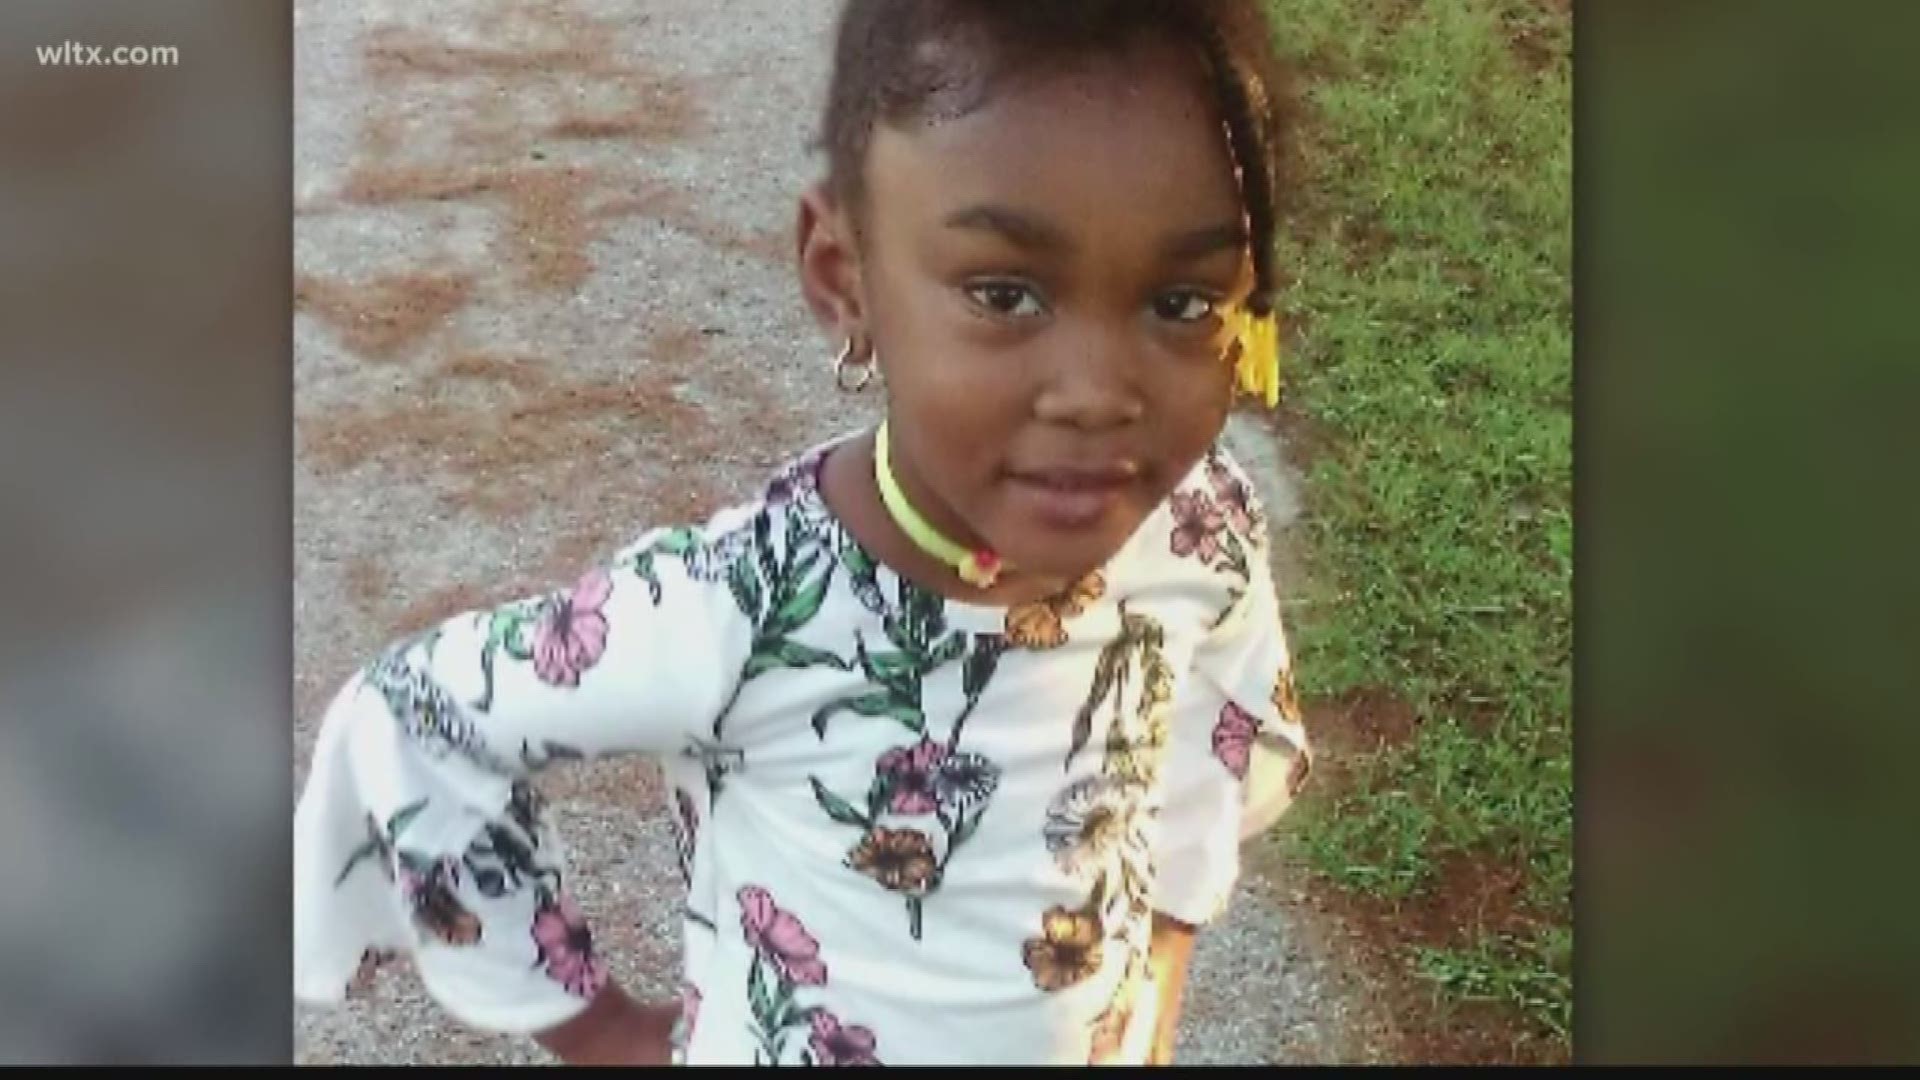 The family of Nevaeh Adams held a funeral for her on Sunday. The 5-year-old Sumter girl was killed in August, and her body was found in a landfill in October.